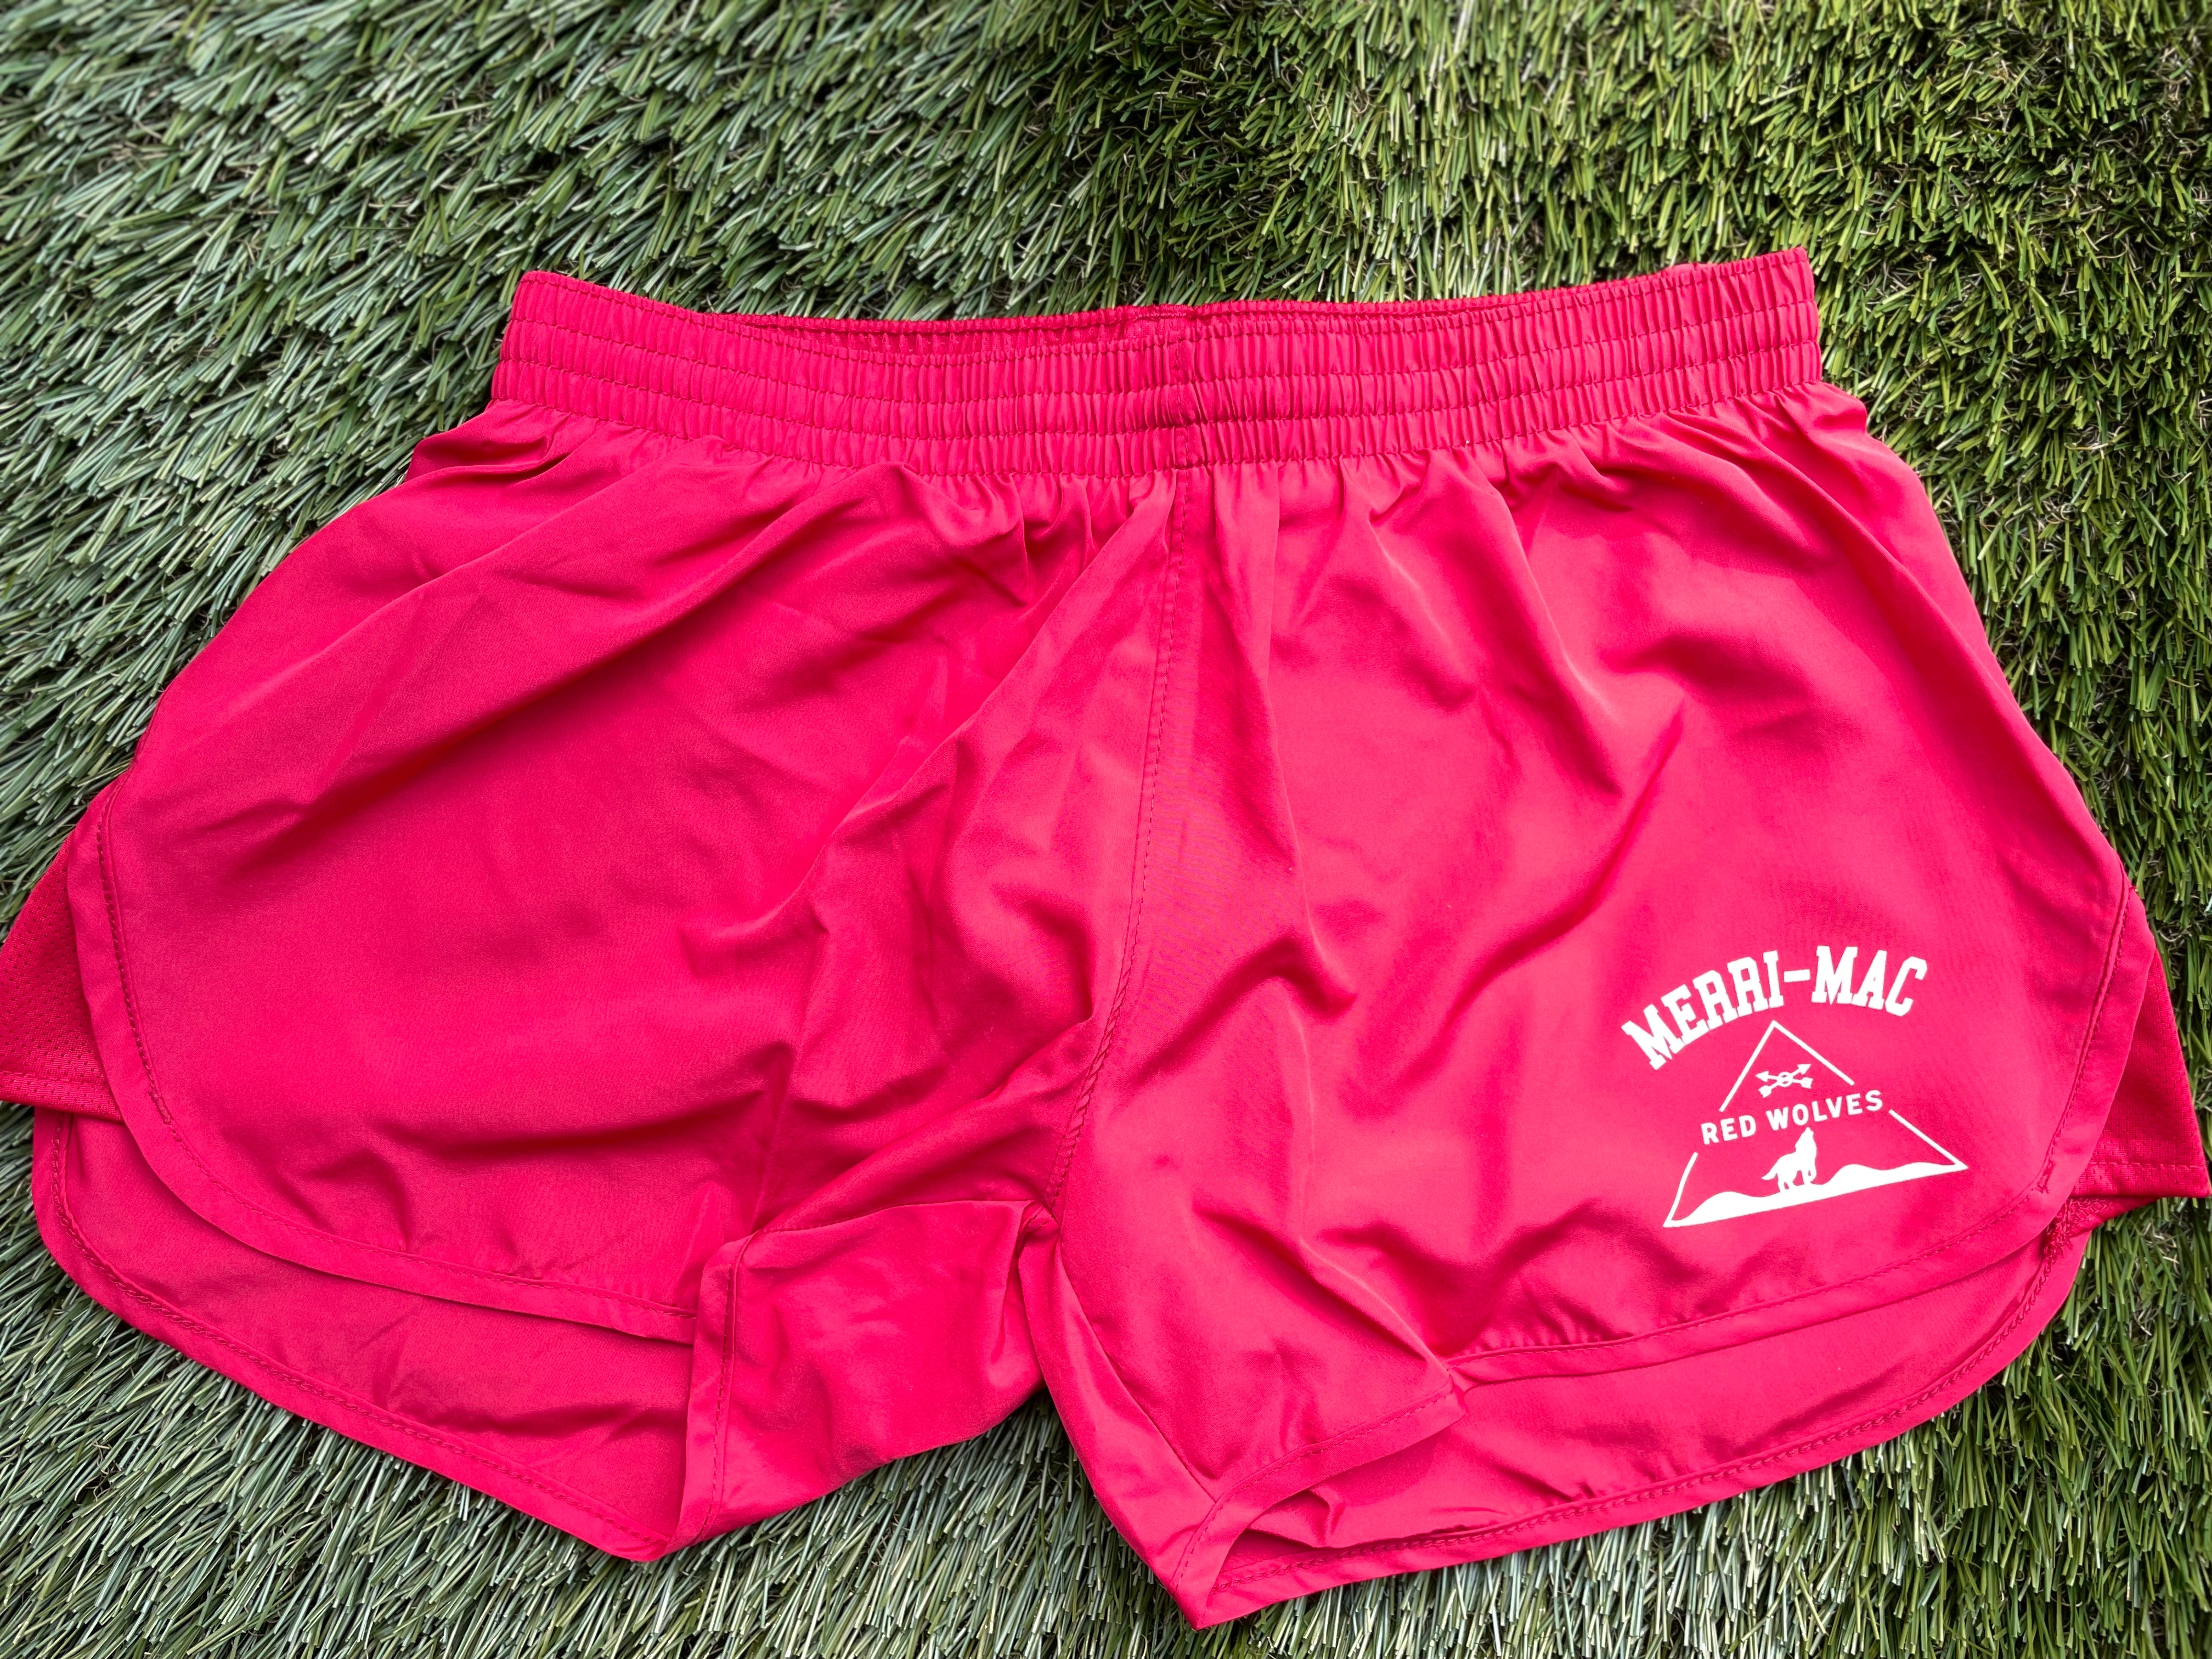 Tribe Shorts - Red Wolves